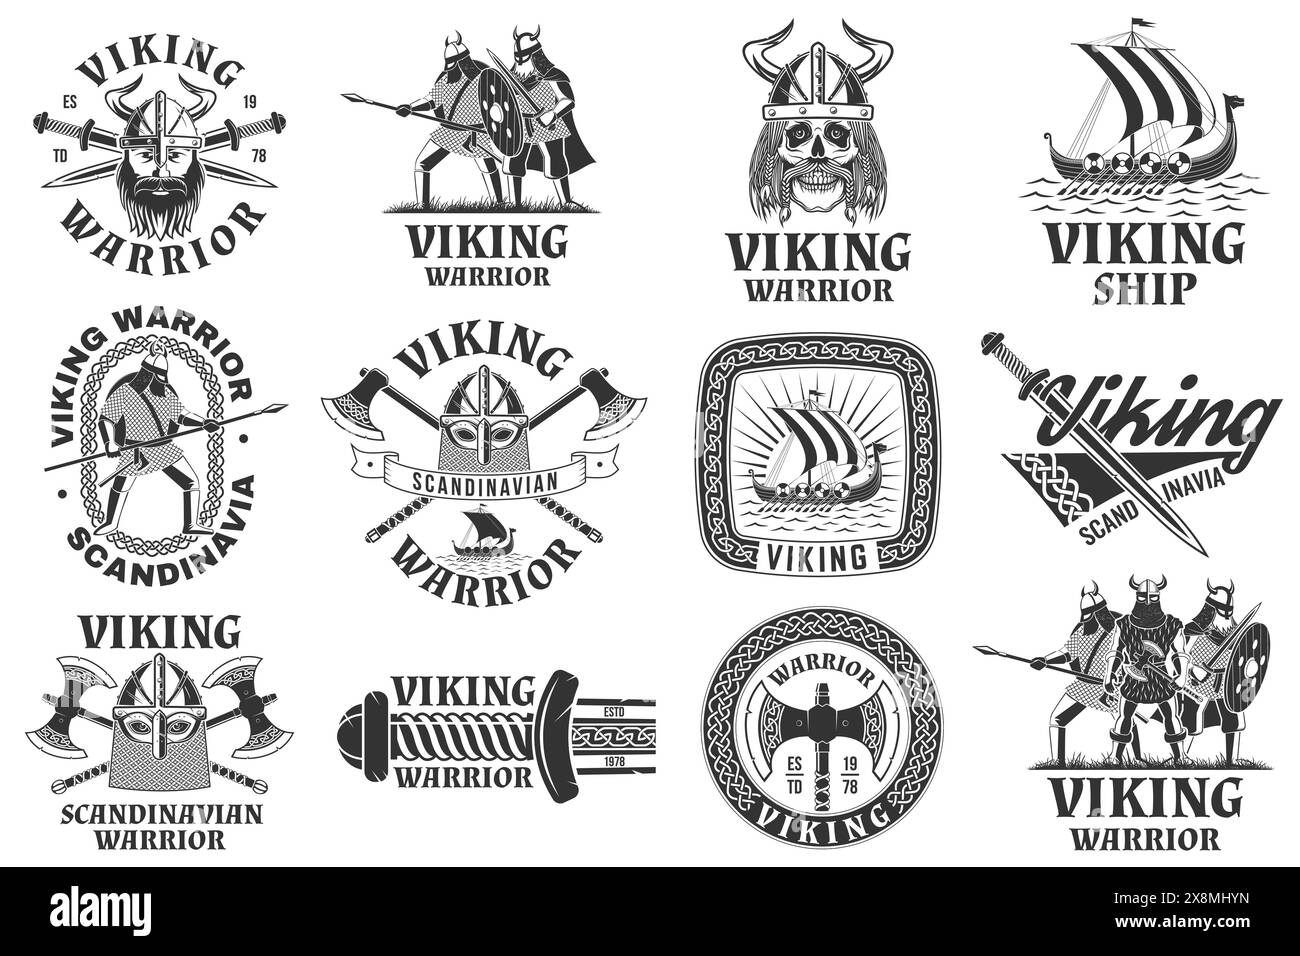 Set of viking warrior logos, badges, stickers. Vector illustration. For emblems, labels and patch. Monochrome style viking in helmet with crossed Stock Vector